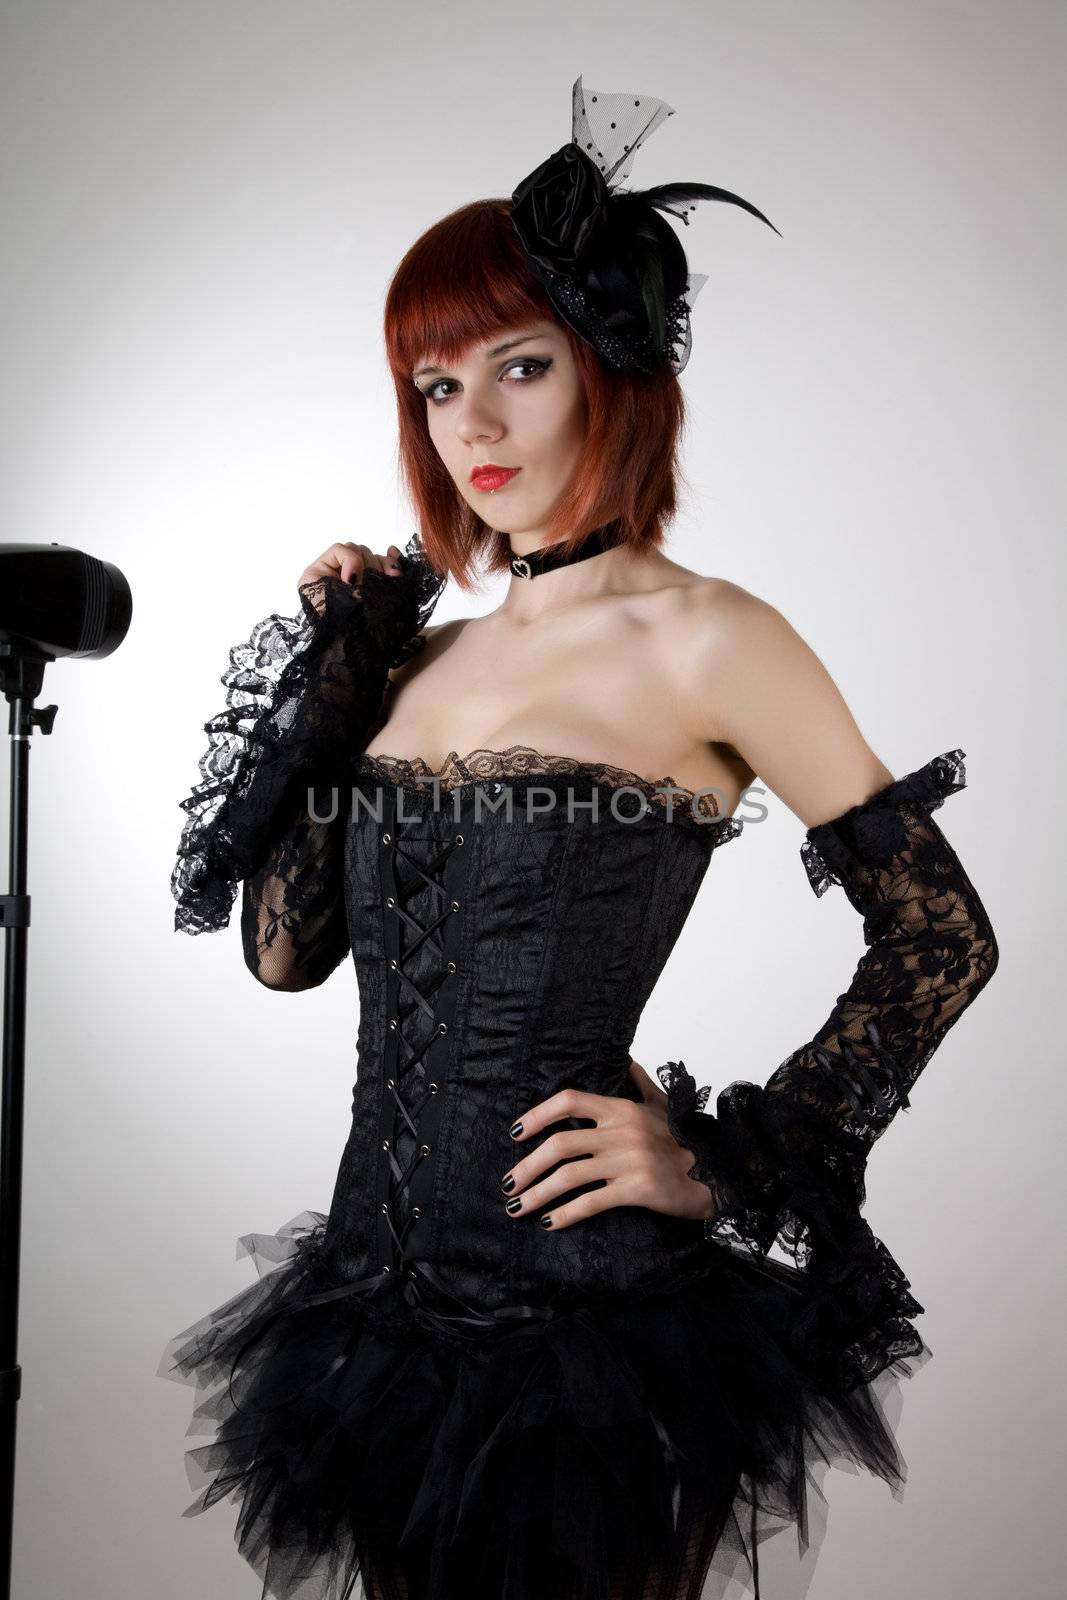 Attractive woman in black corset and tutu skirt  by Elisanth